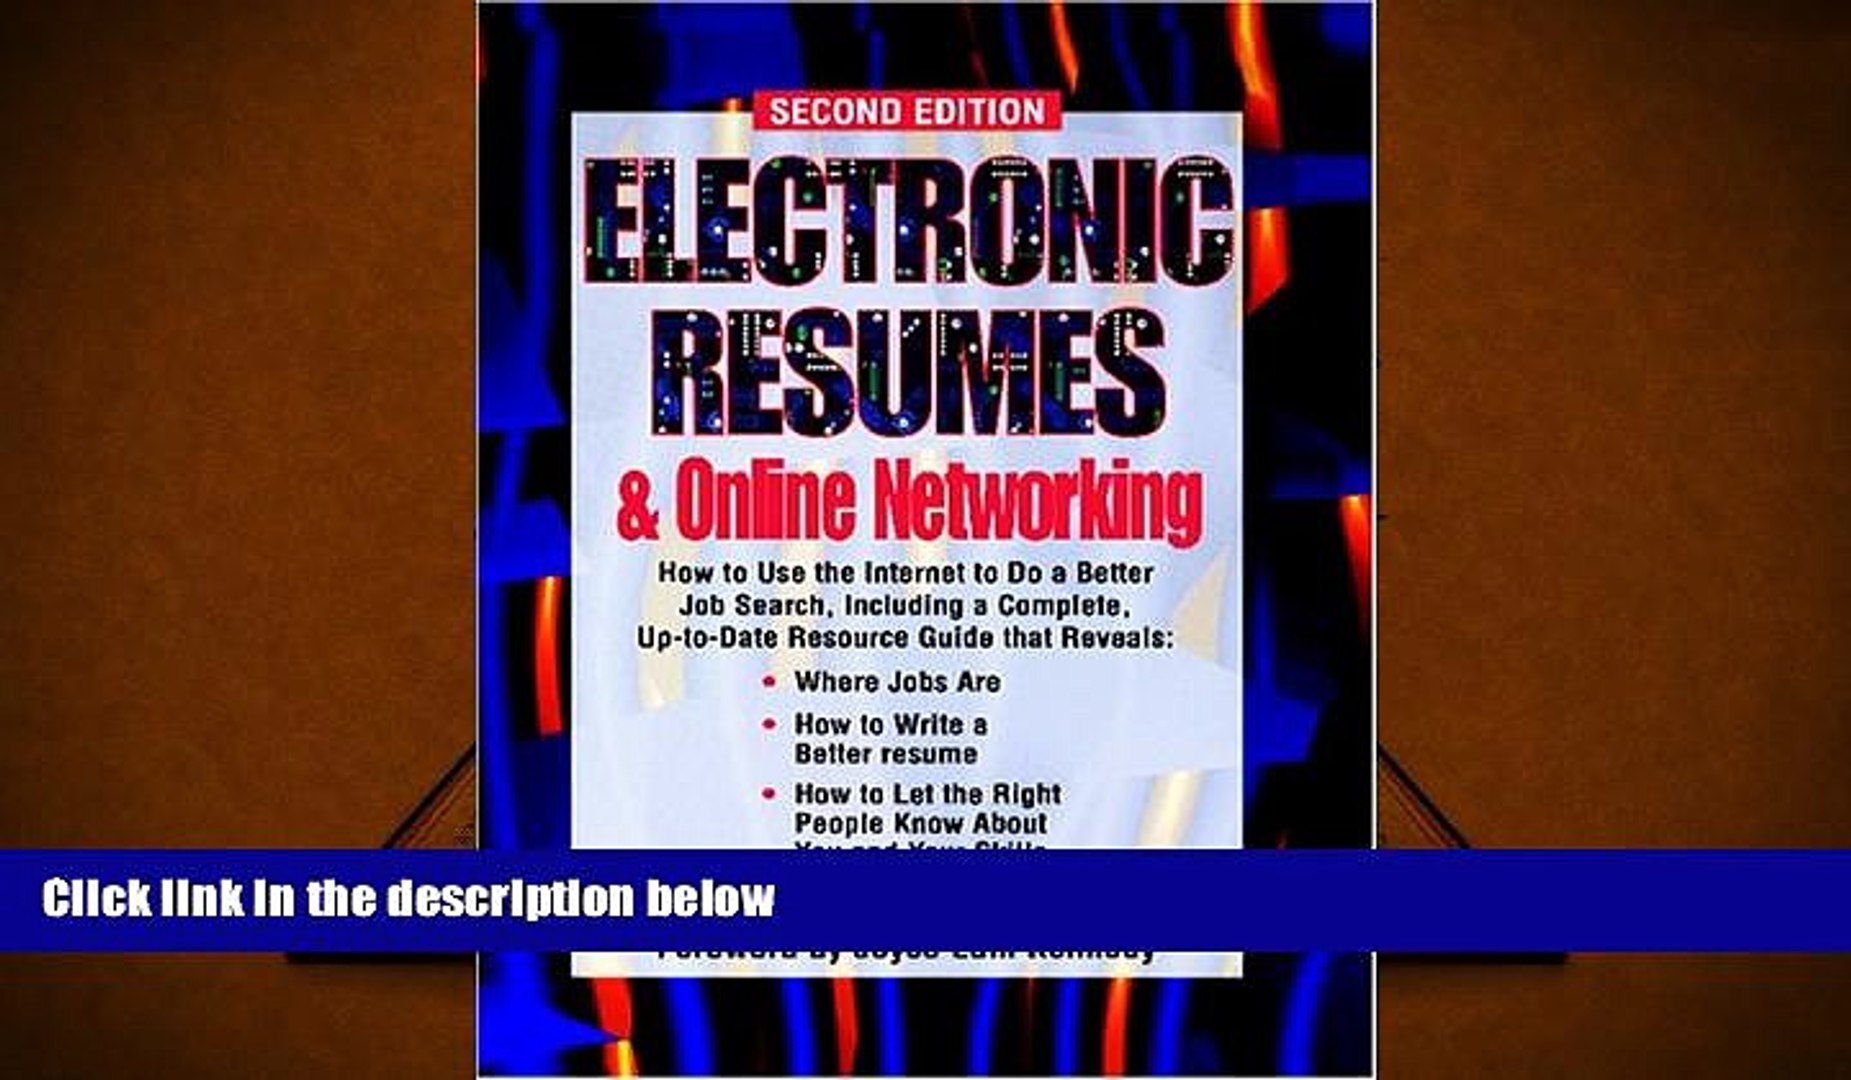 Download Electronic Resumes   Online Marketing,: Second Edition (Electronic Resumes   Online